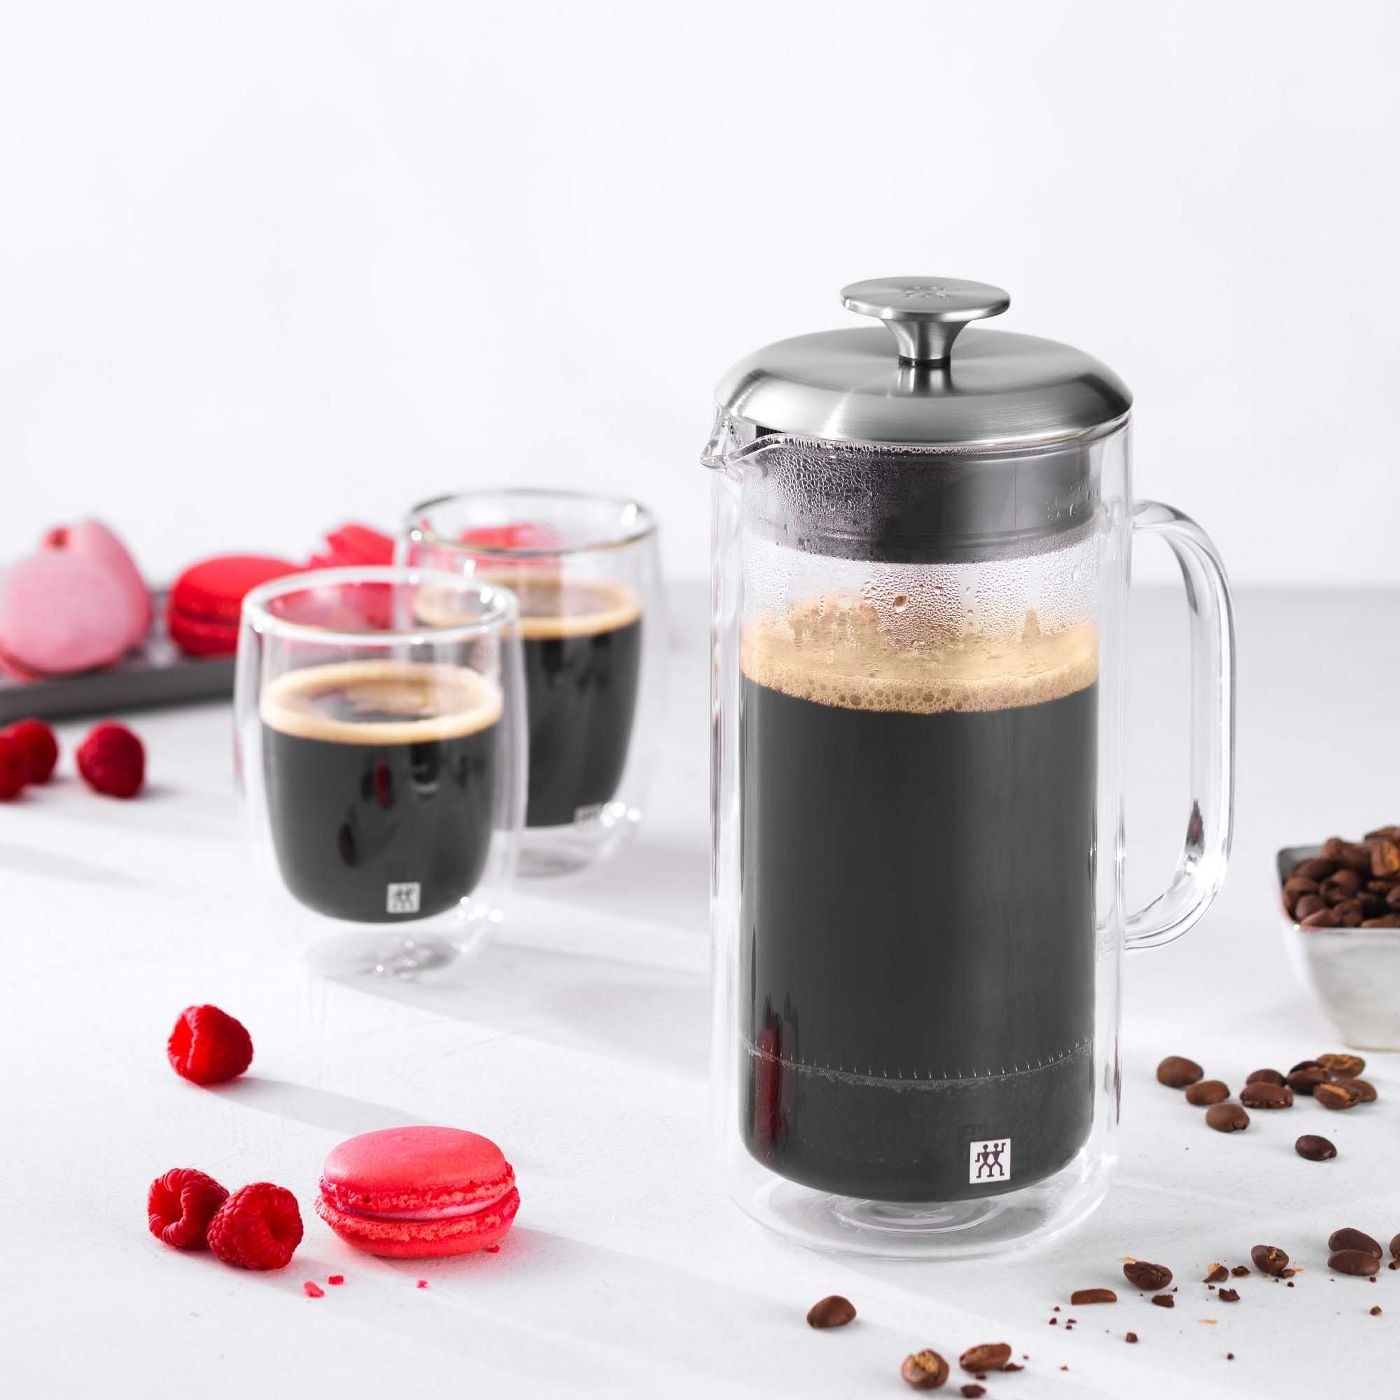 A filled French press sits on a table near raspberries, macarons and two cups of coffee